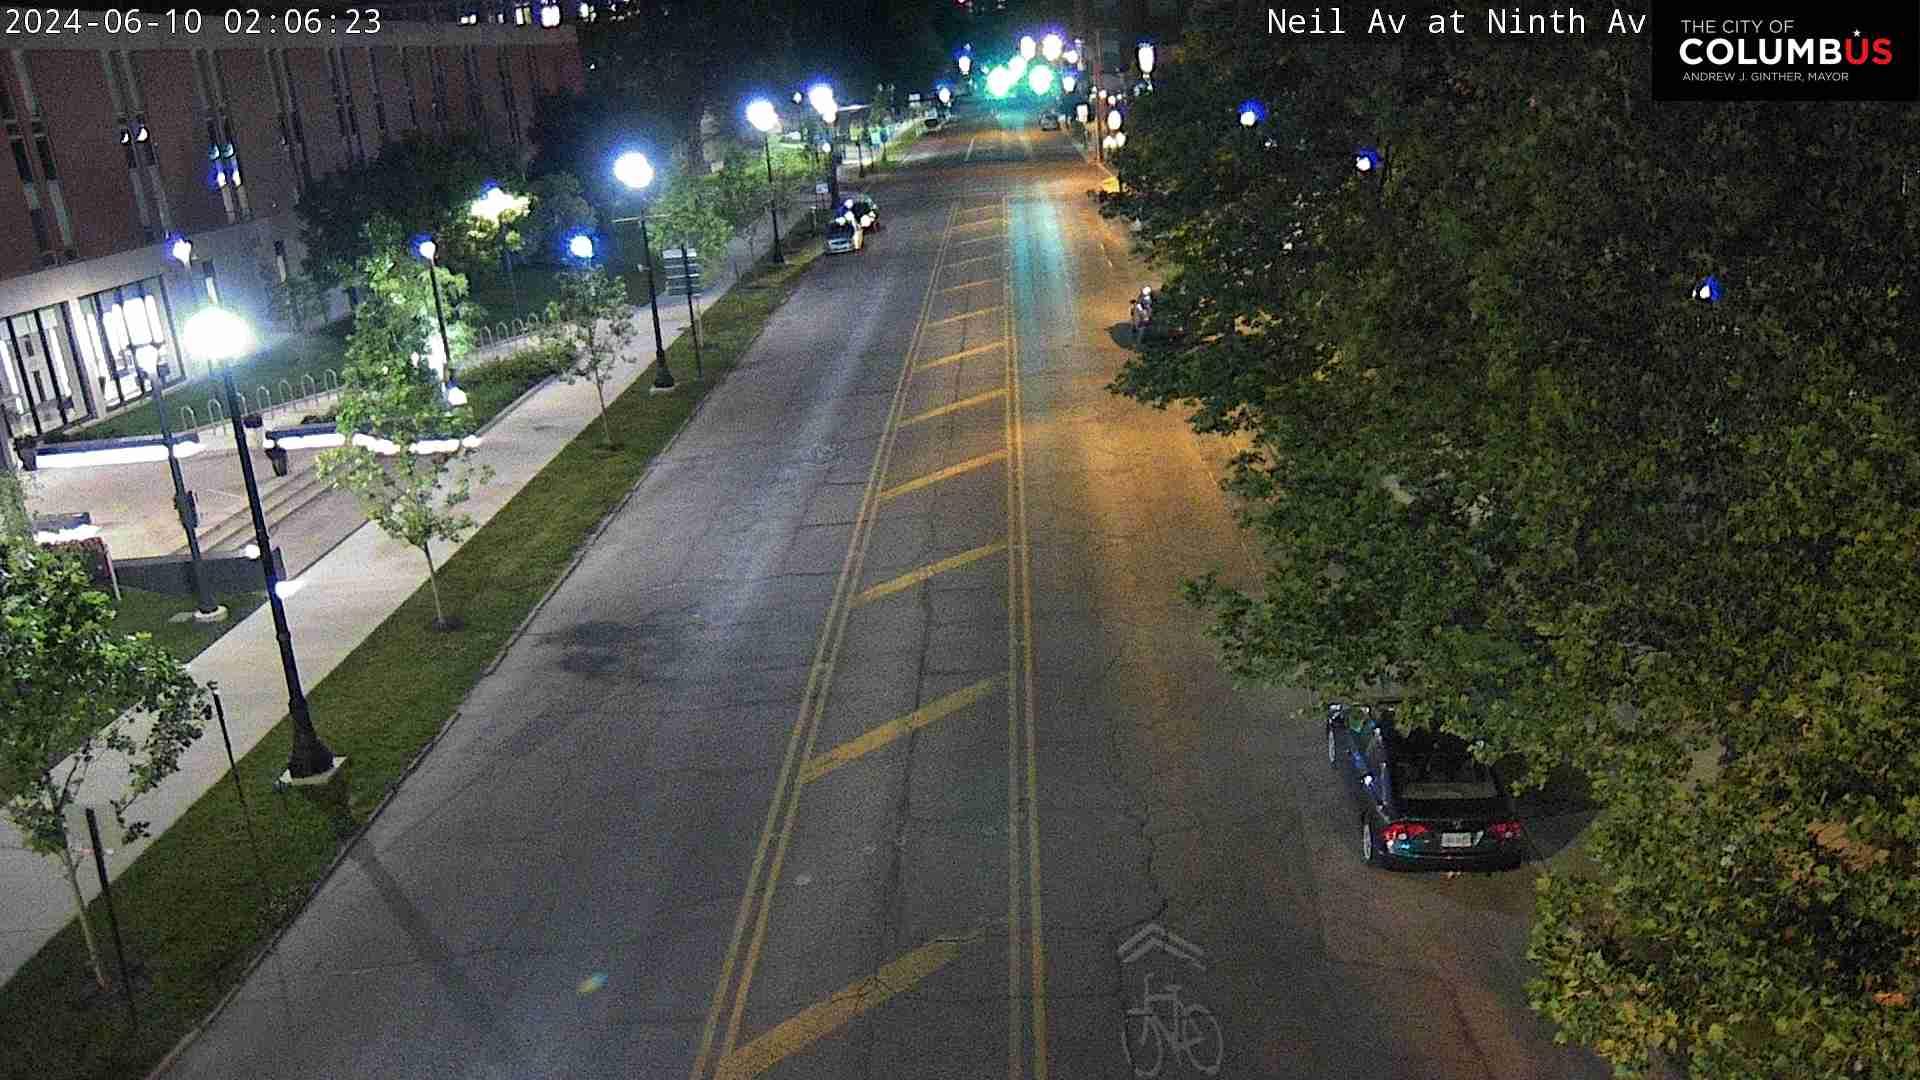 Traffic Cam University District District 4: City of Columbus) Neil Ave at Ninth Ave